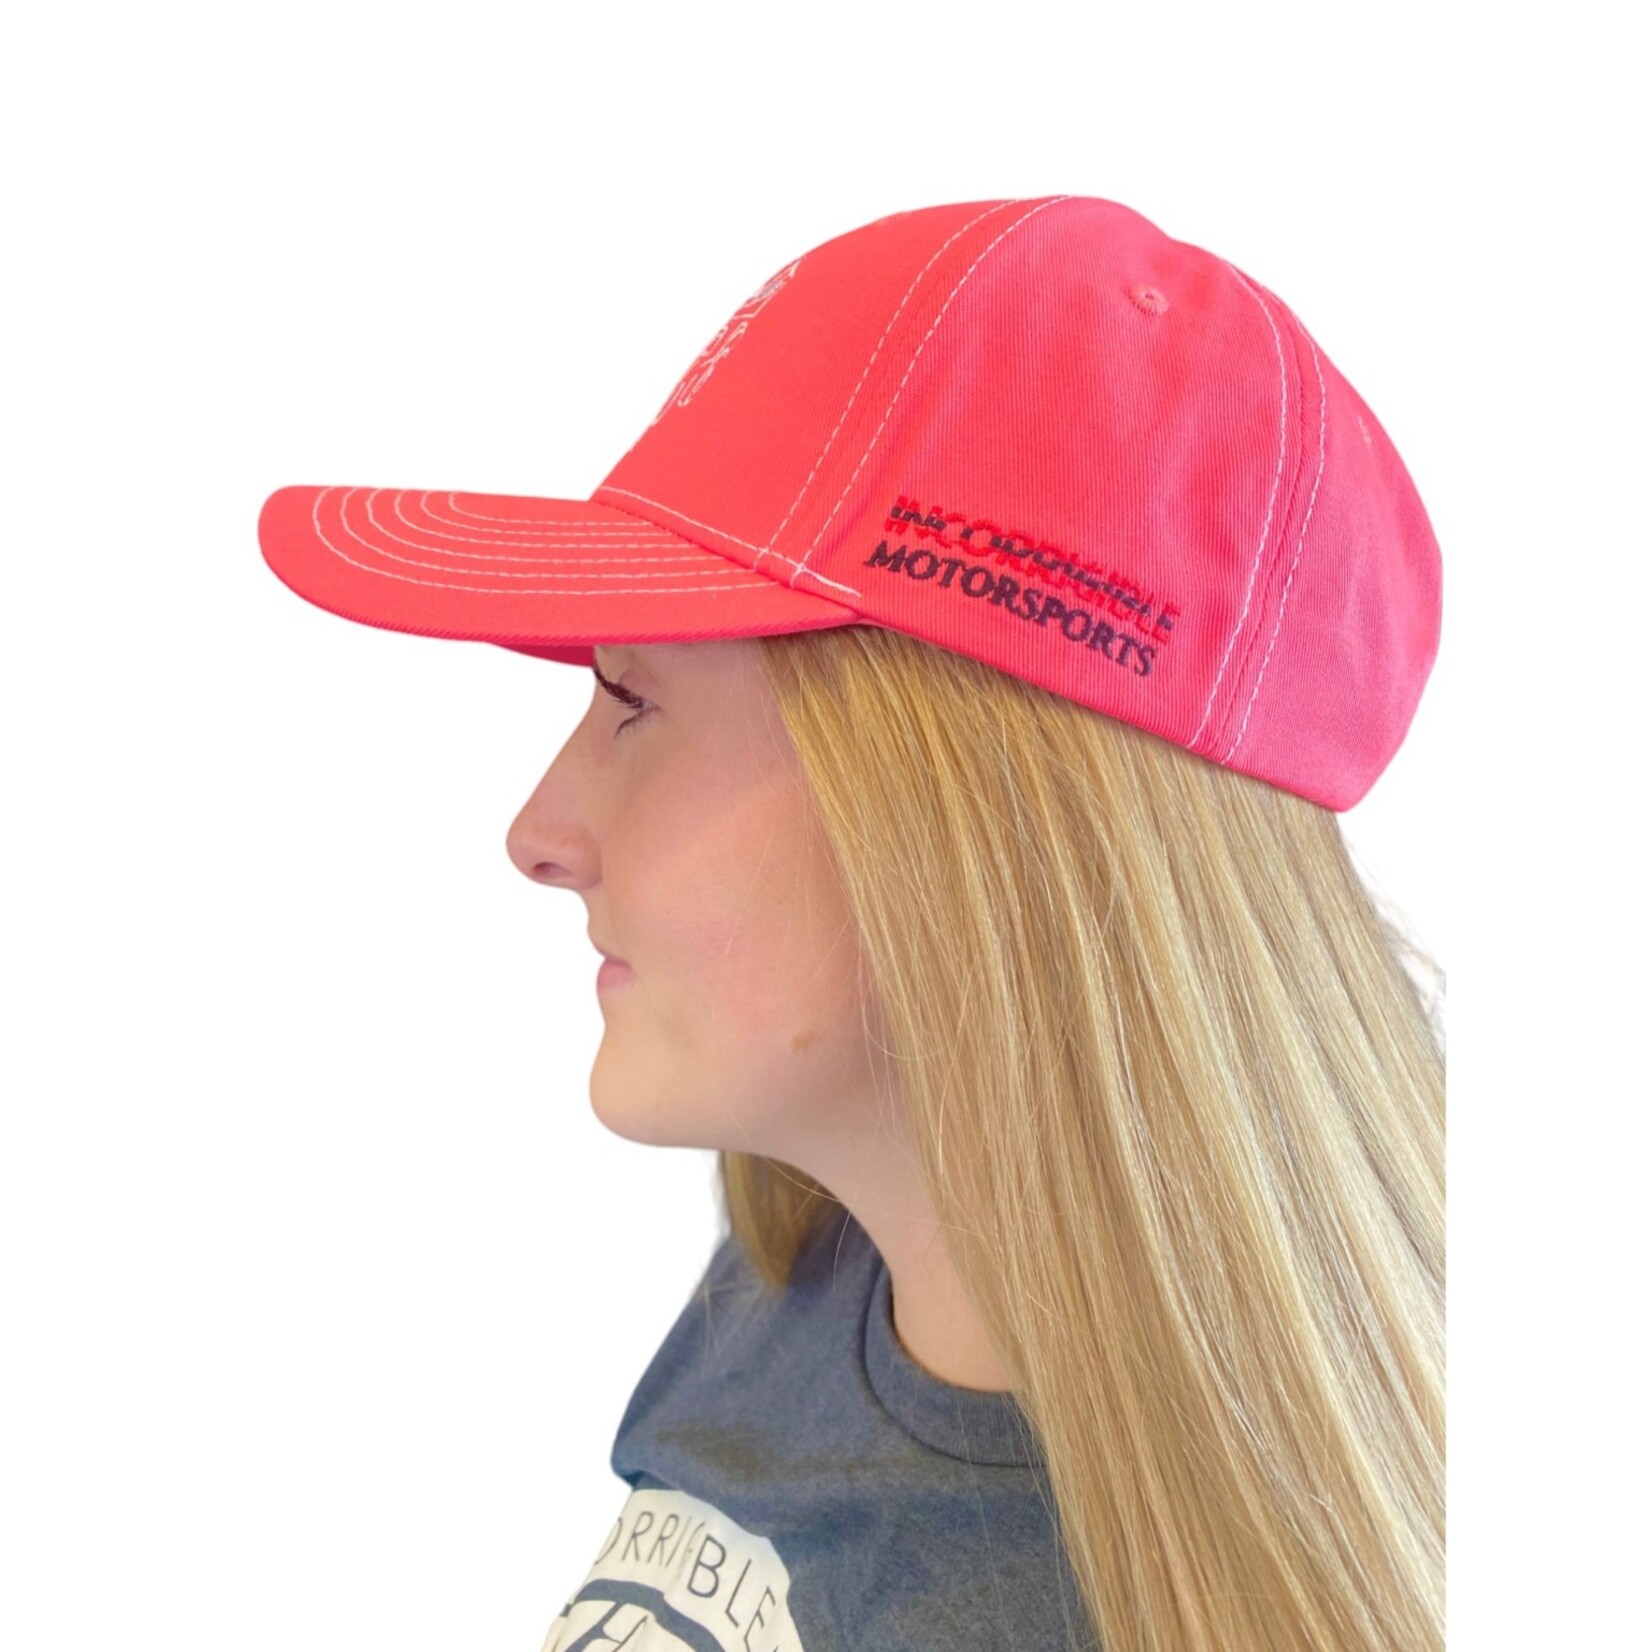 INCORRIGIBLE MOTORSPORTS INCORRIGIBLE OFF-ROAD WOMENS HAT EMBROIDERED 6 PANEL STRUCTURED SNAP BACK